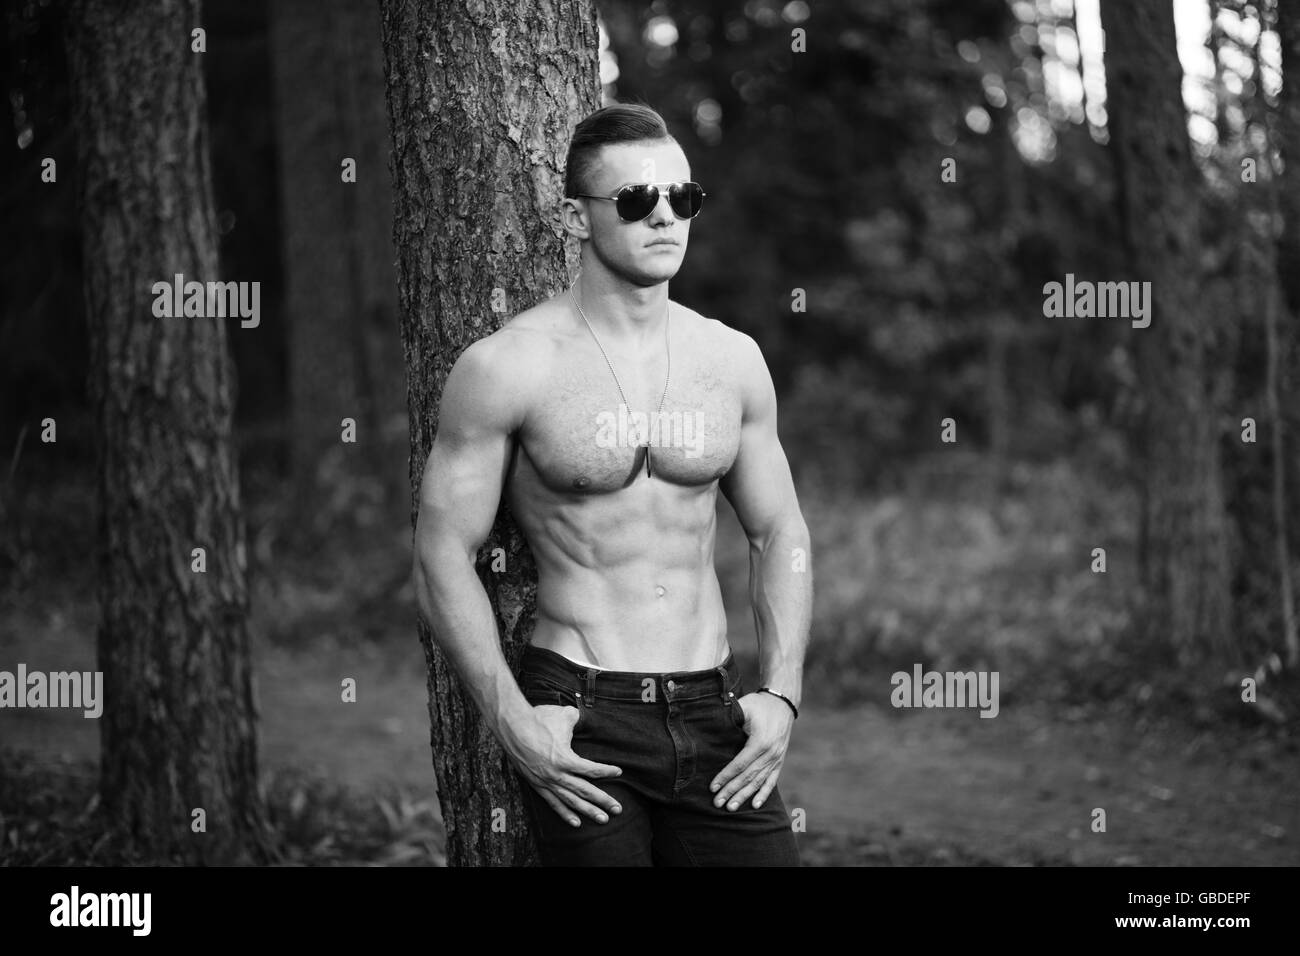 BW outdoor portrait of muscular young man in sunglasses. Stock Photo